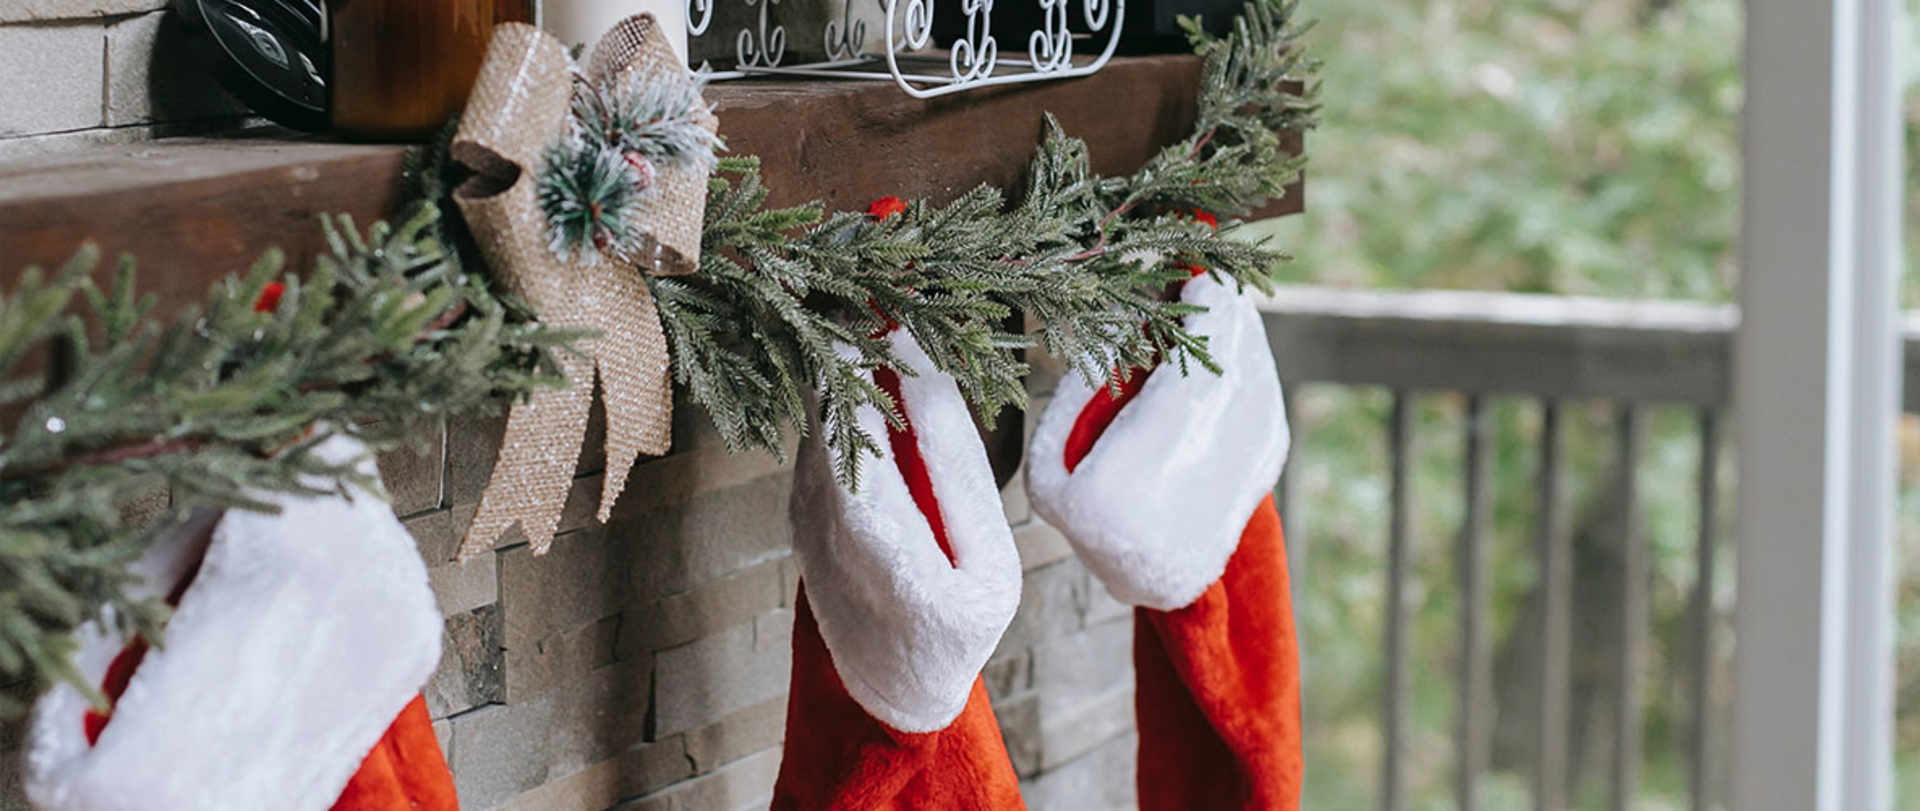 Getting your home ready for Christmas this year | Deck the halls